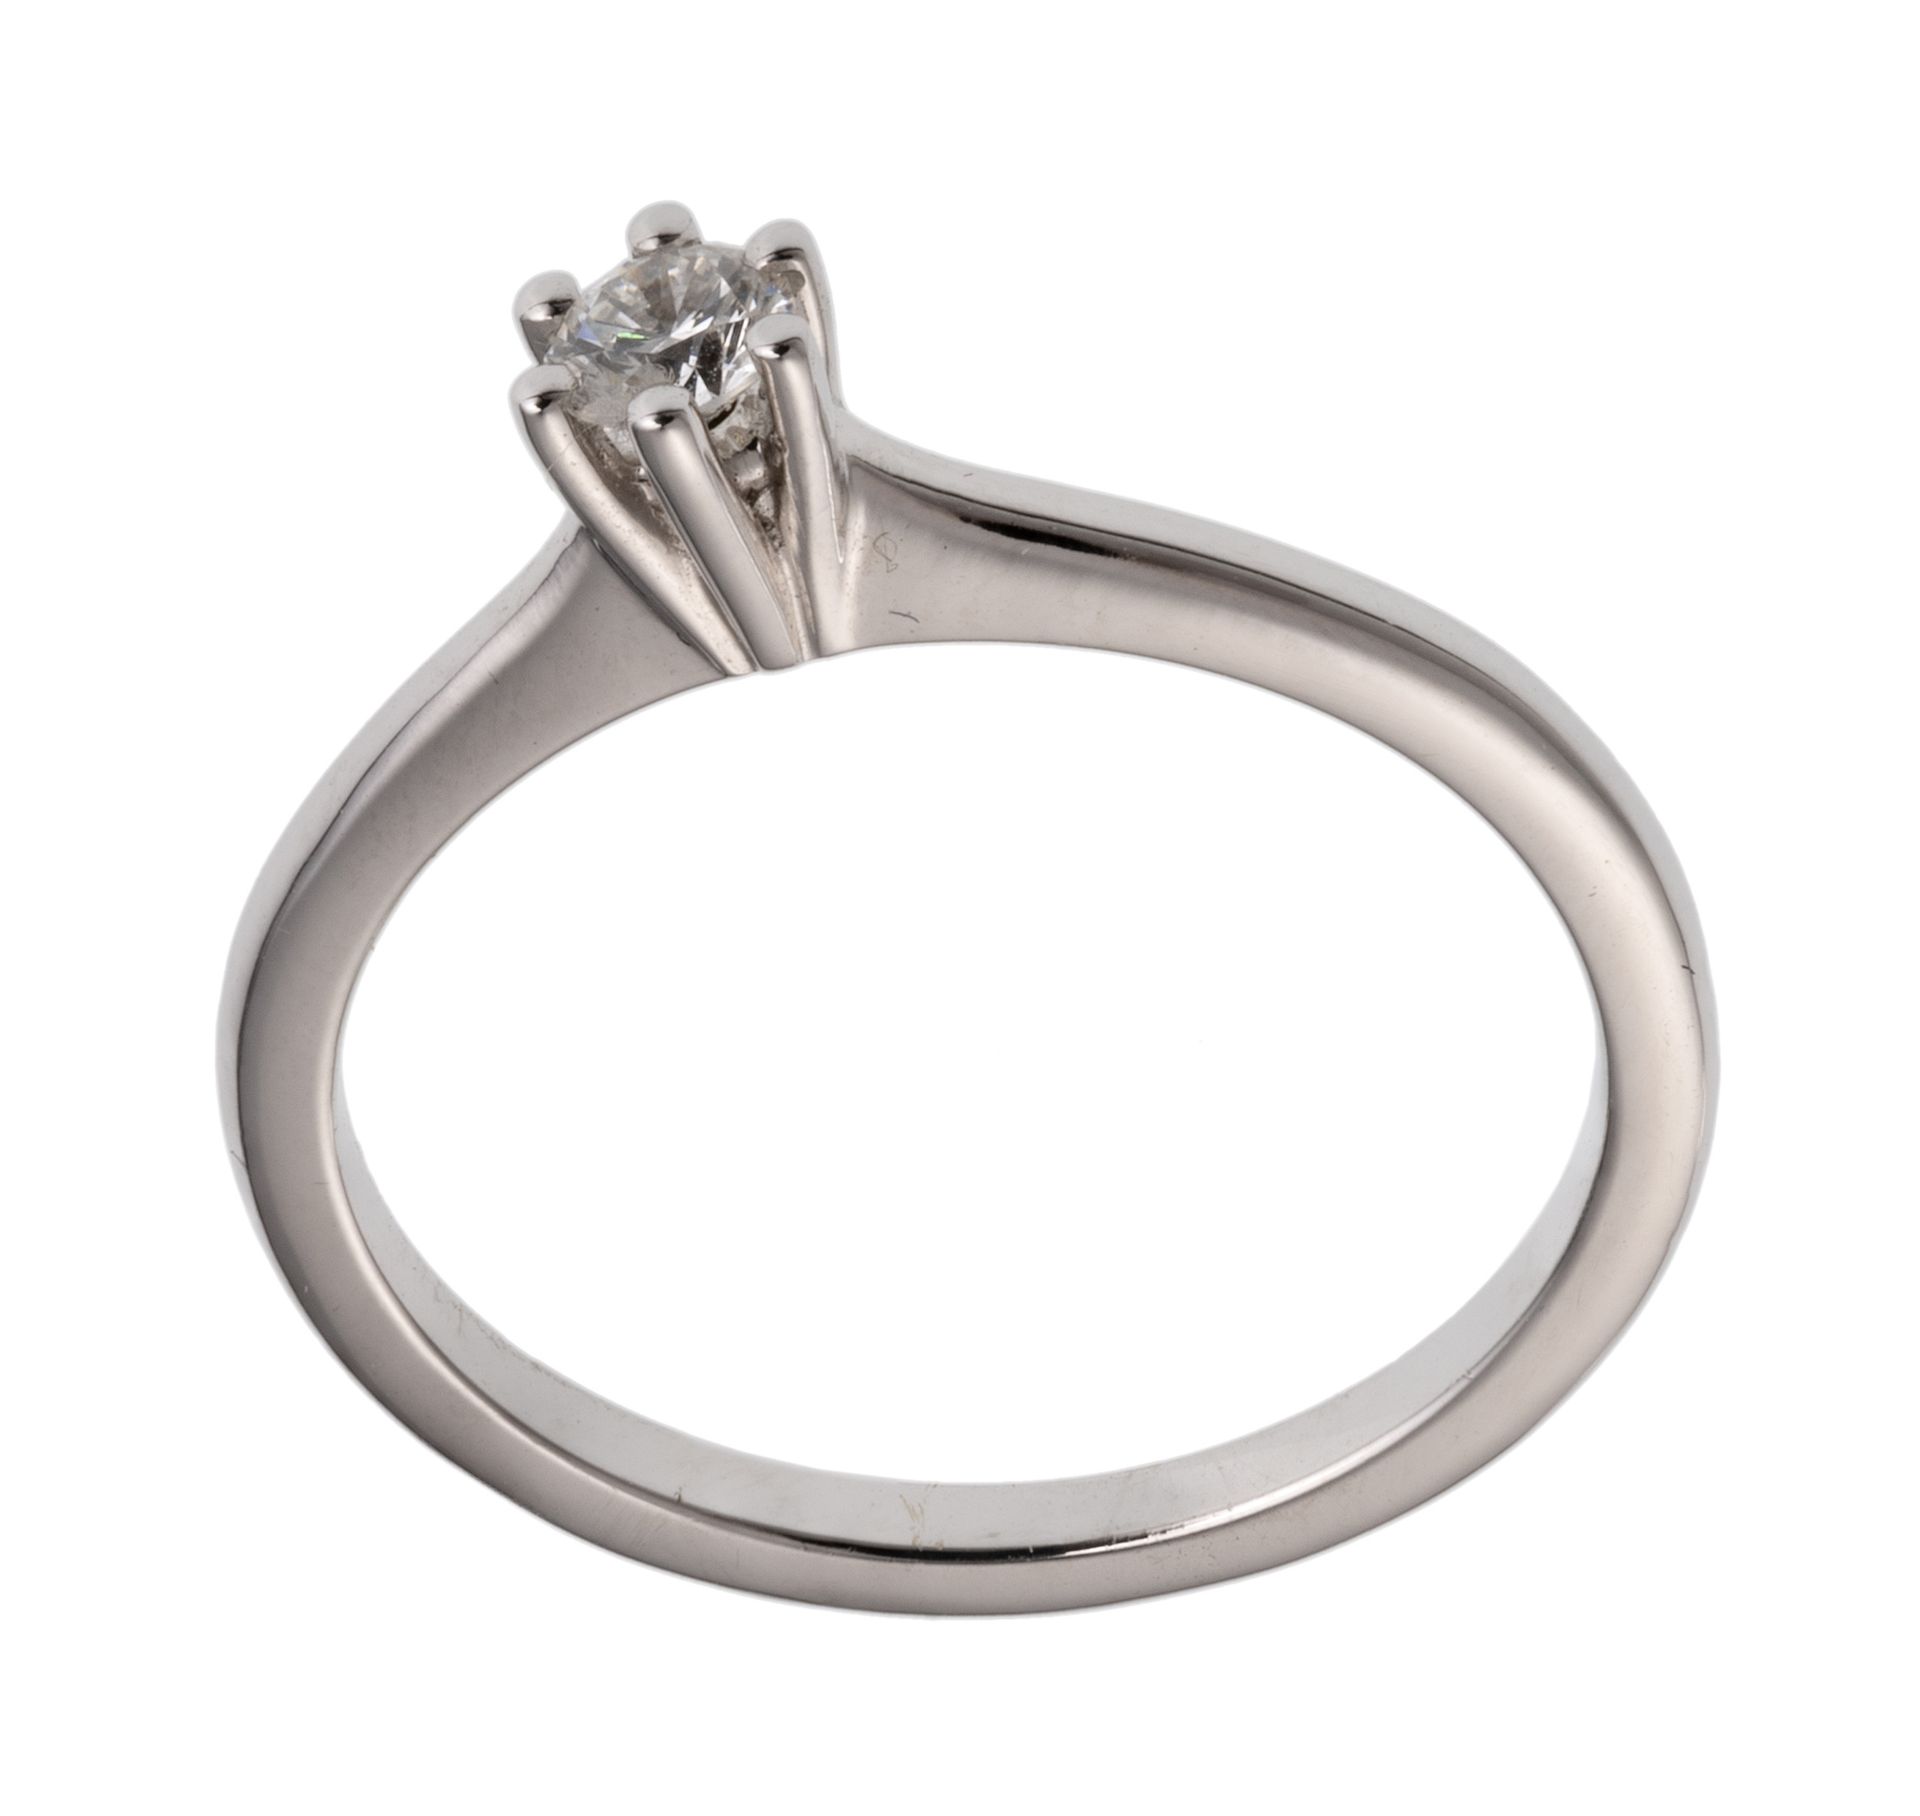 WHITE GOLD SOLITAIRE RING WITH CENTRAL DIAMOND